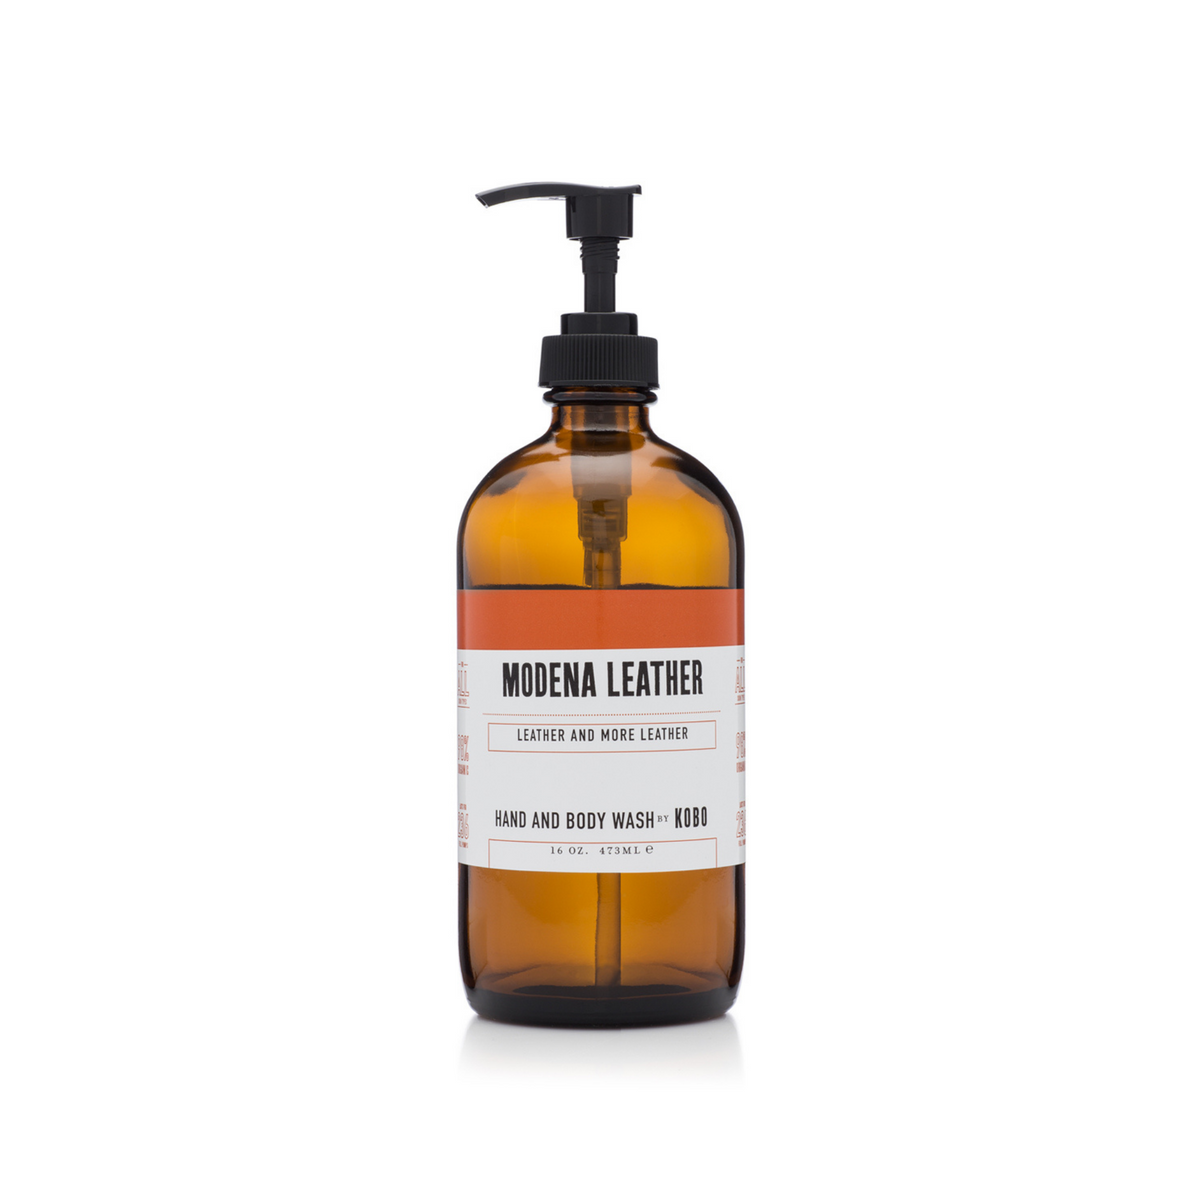 Primary Image of Modena Leather Hand and Body Wash